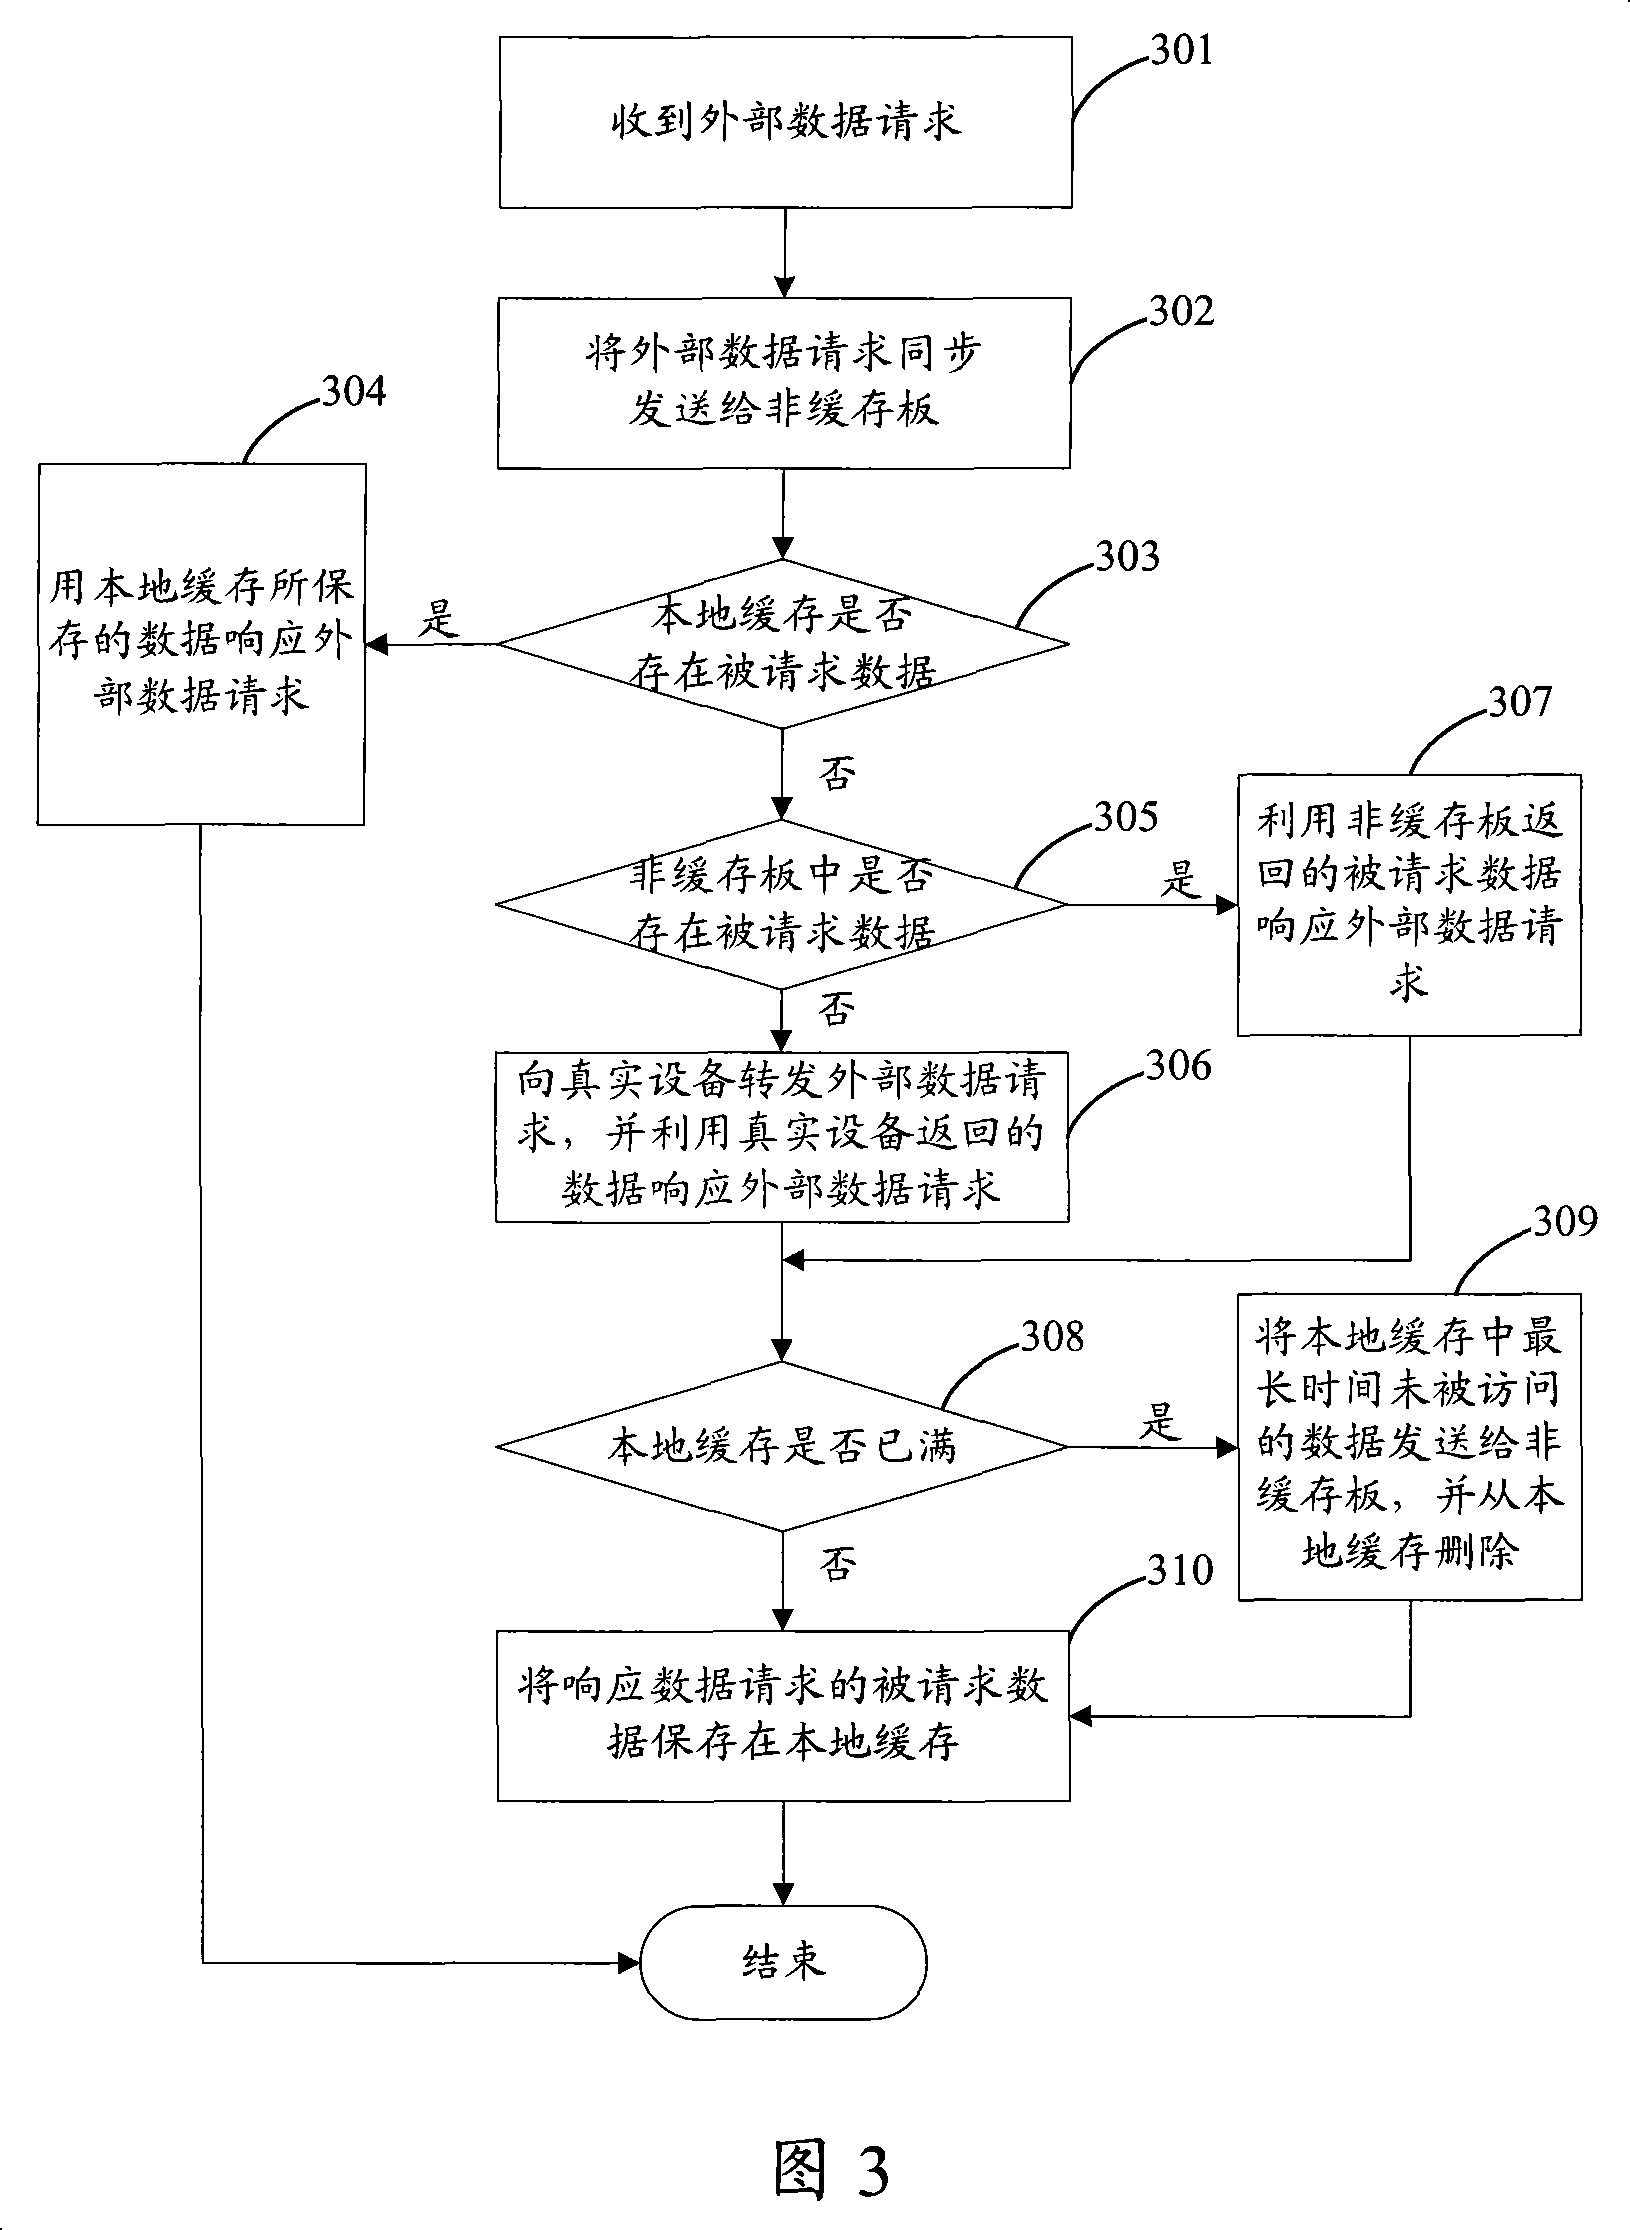 Distributed caching method and system, caching equipment and non-caching equipment